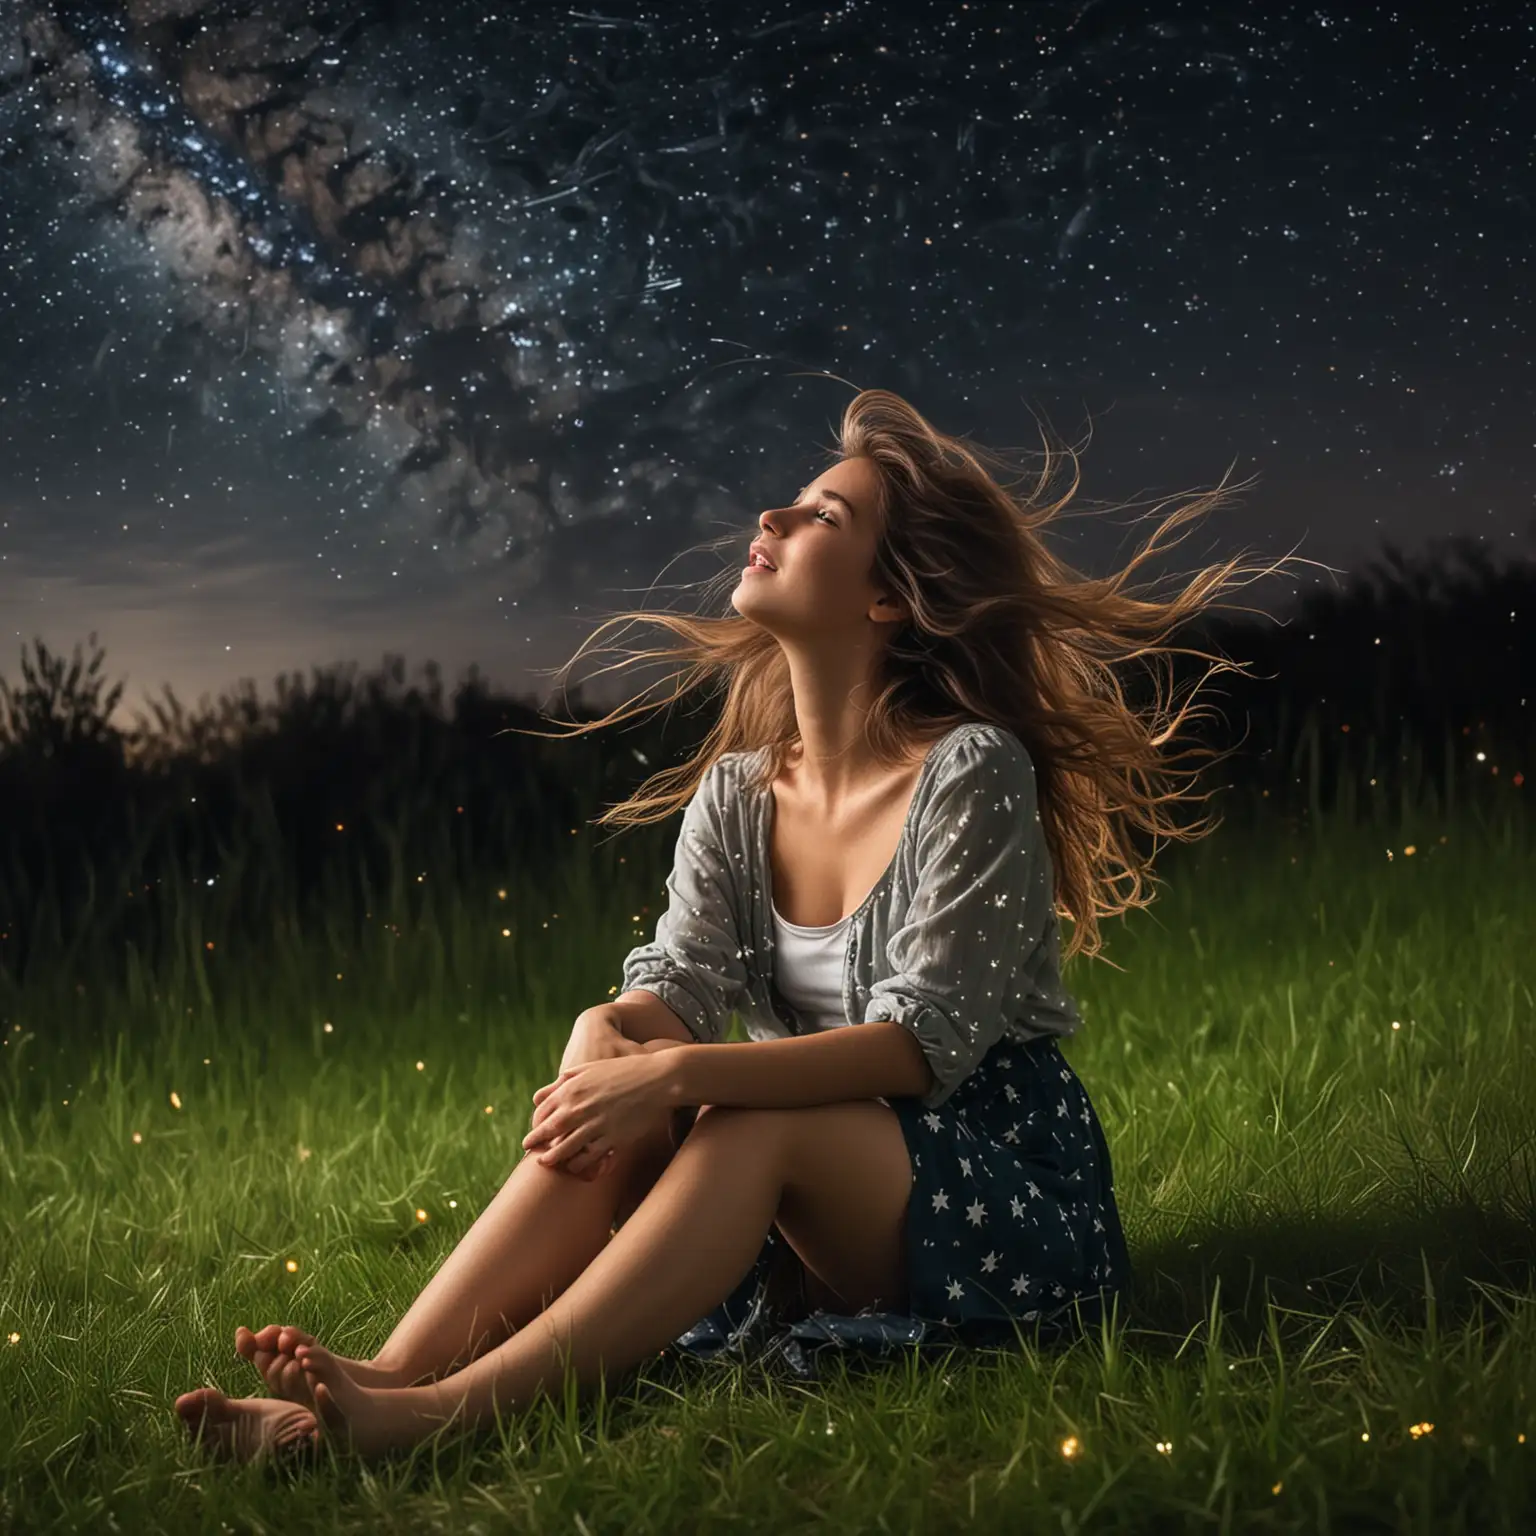 Serene-Girl-Sitting-on-Grass-Gazing-at-Stars-with-Wind-in-Her-Hair